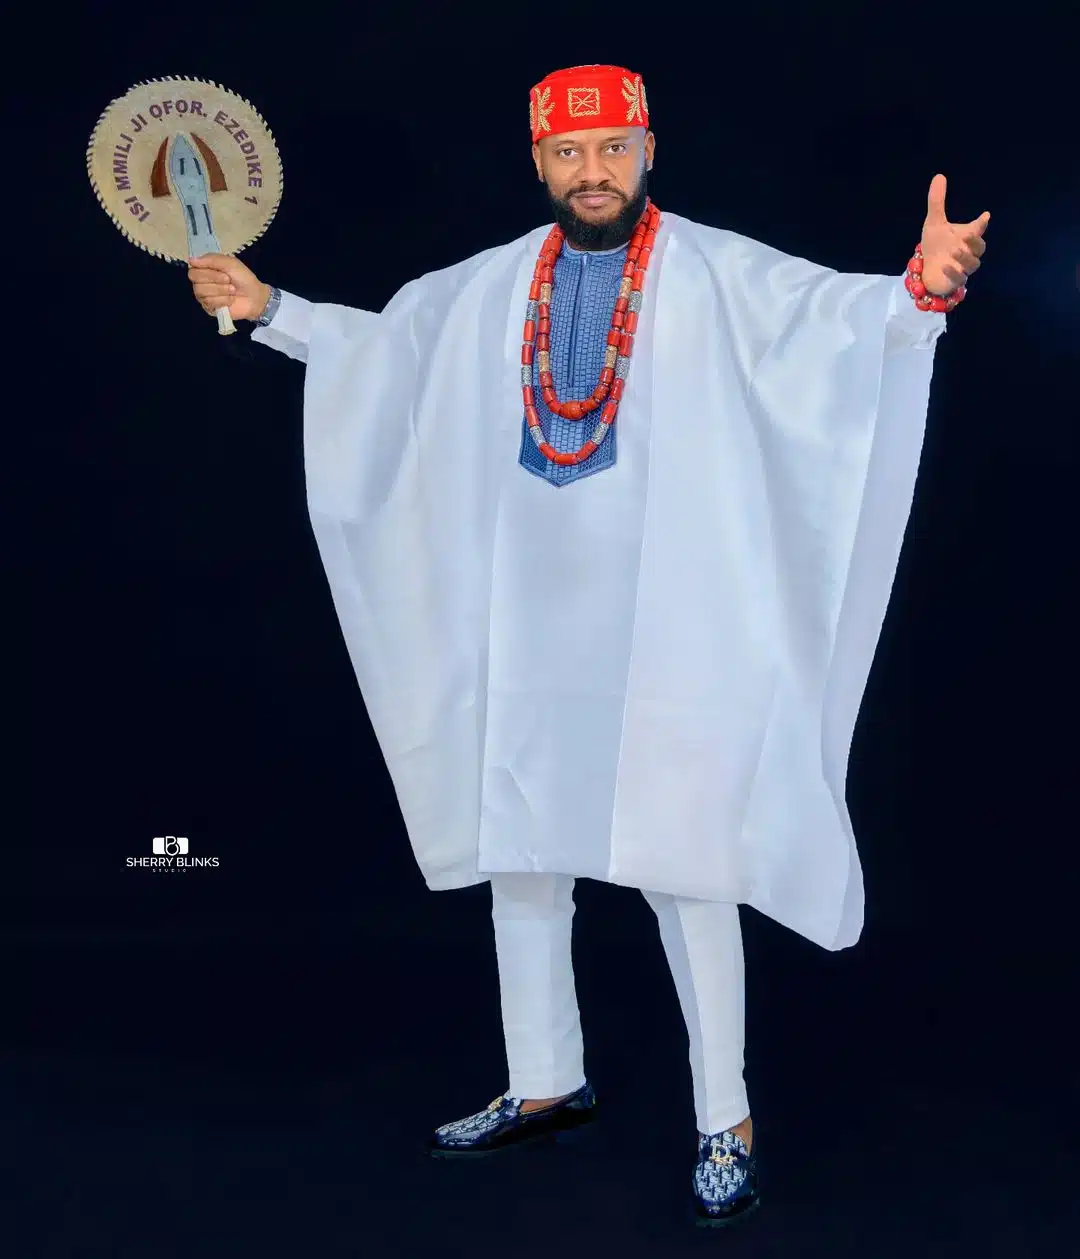 "I'm not a normal human being, ask questions" - Yul Edochie brags